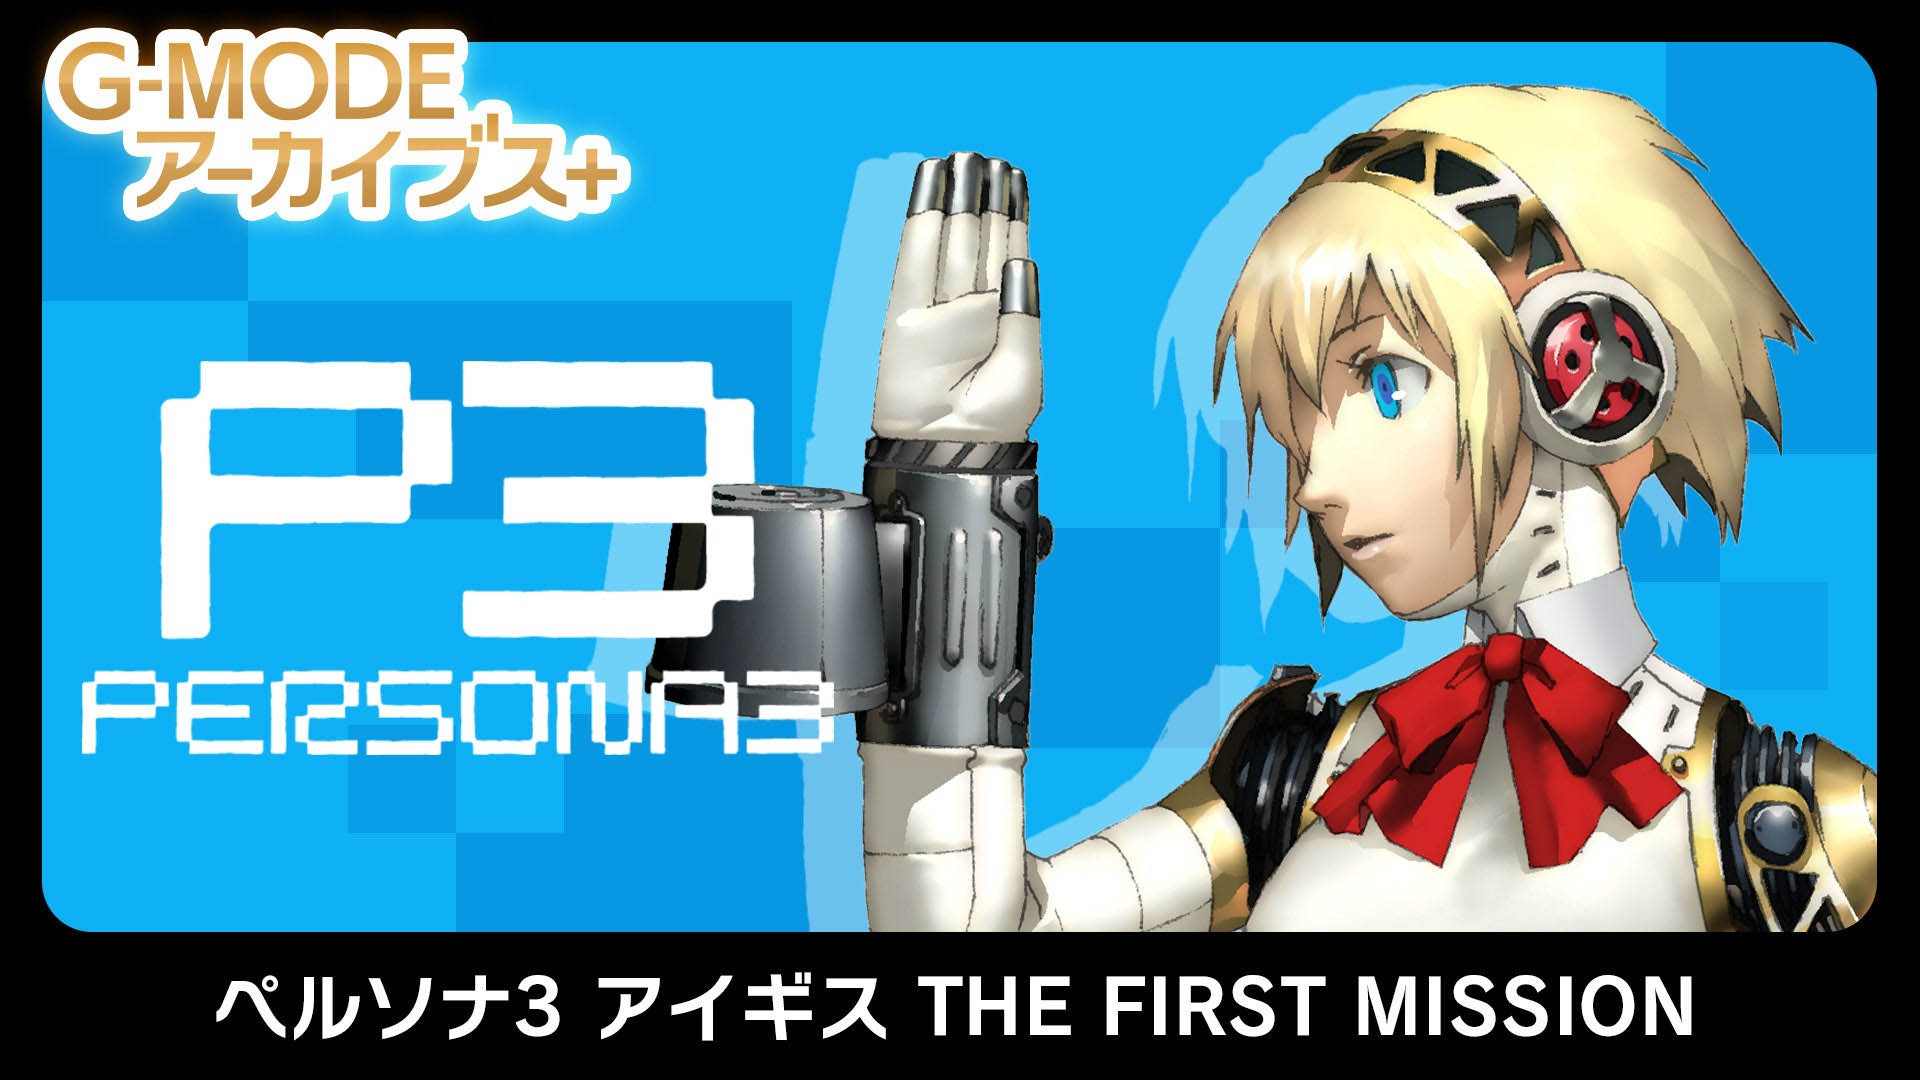 Persona 3 Aigis: The First Mission